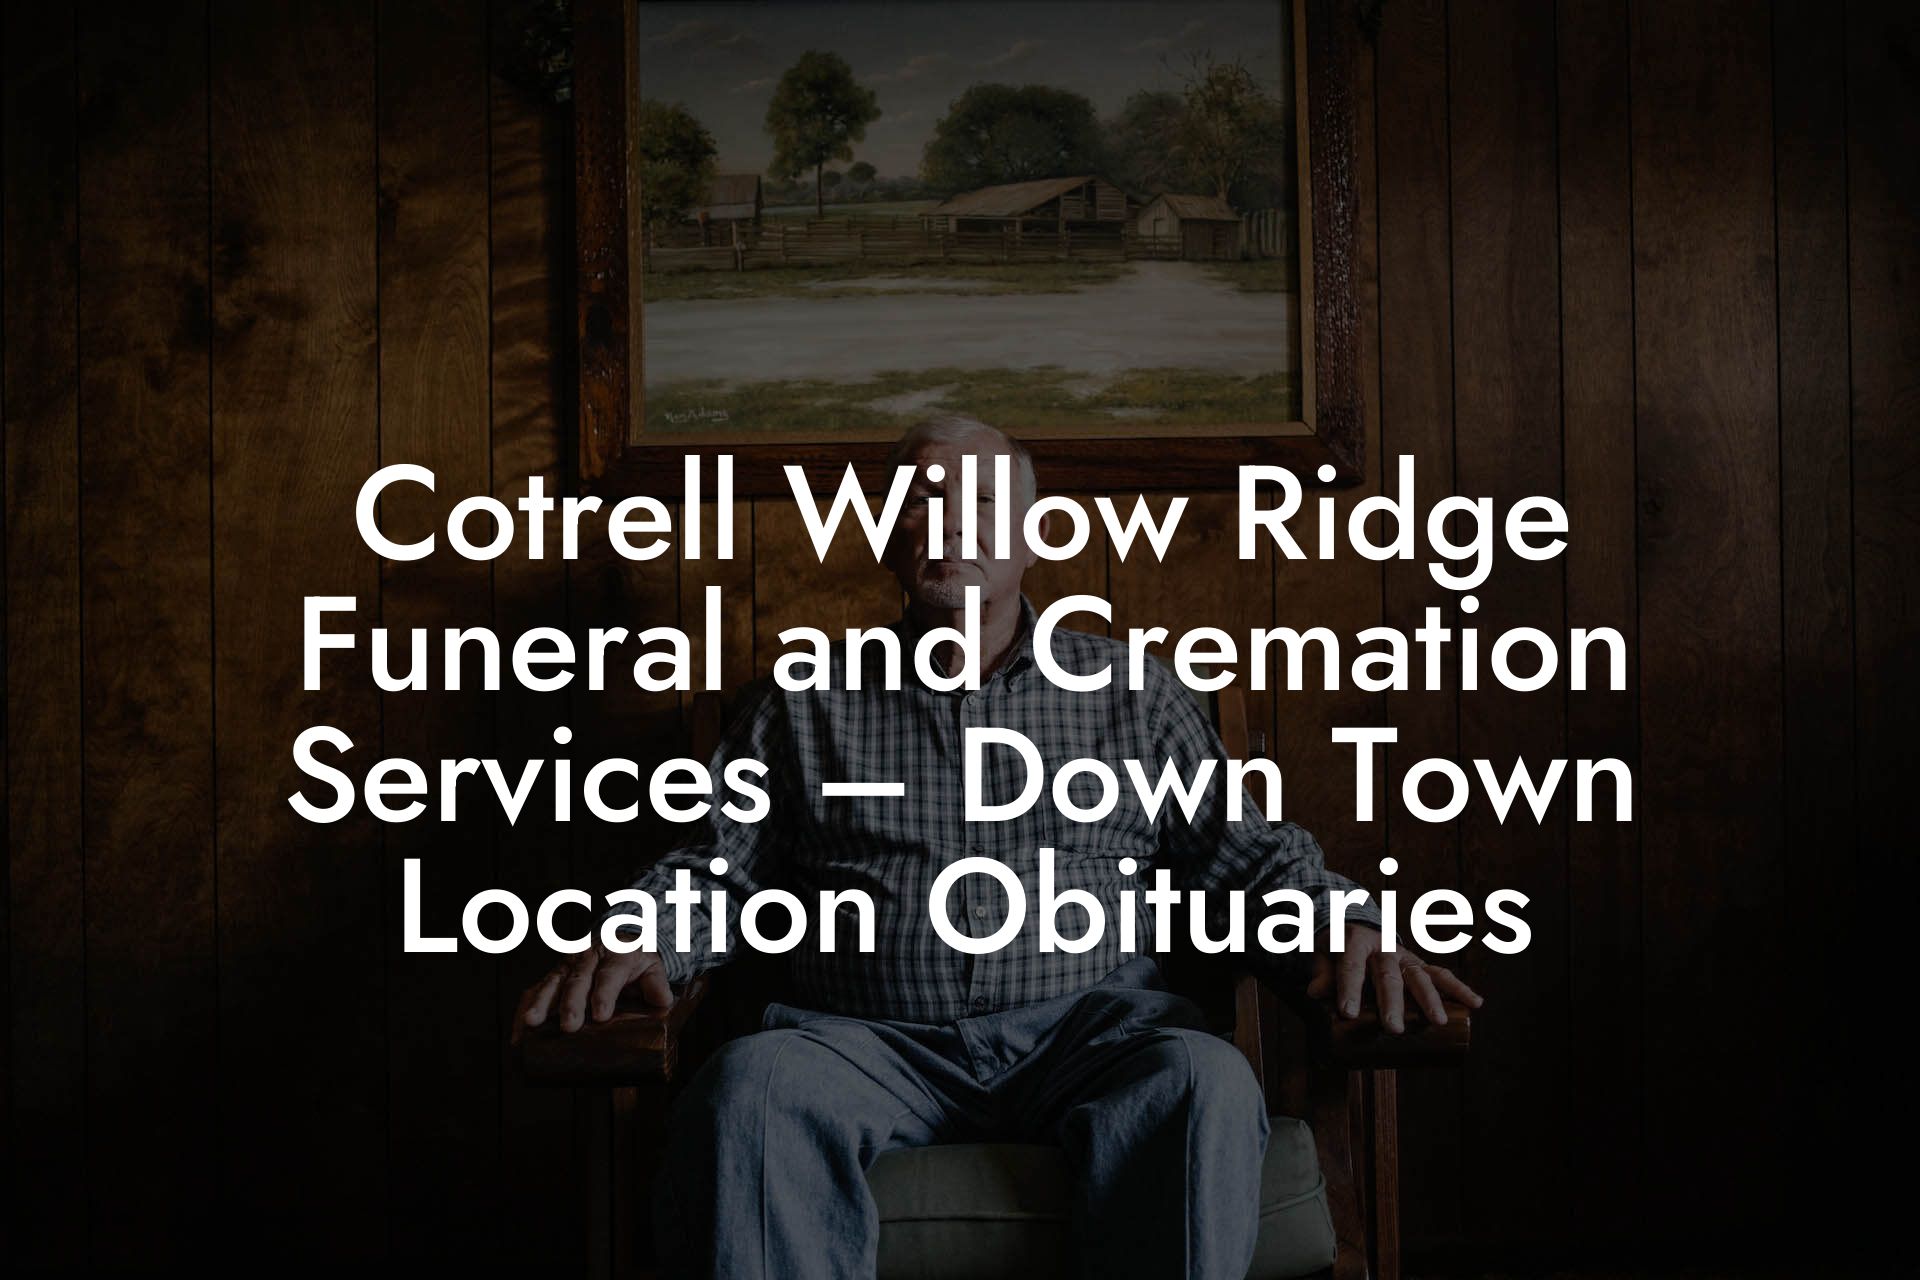 Cotrell Willow Ridge Funeral and Cremation Services – Down Town Location Obituaries